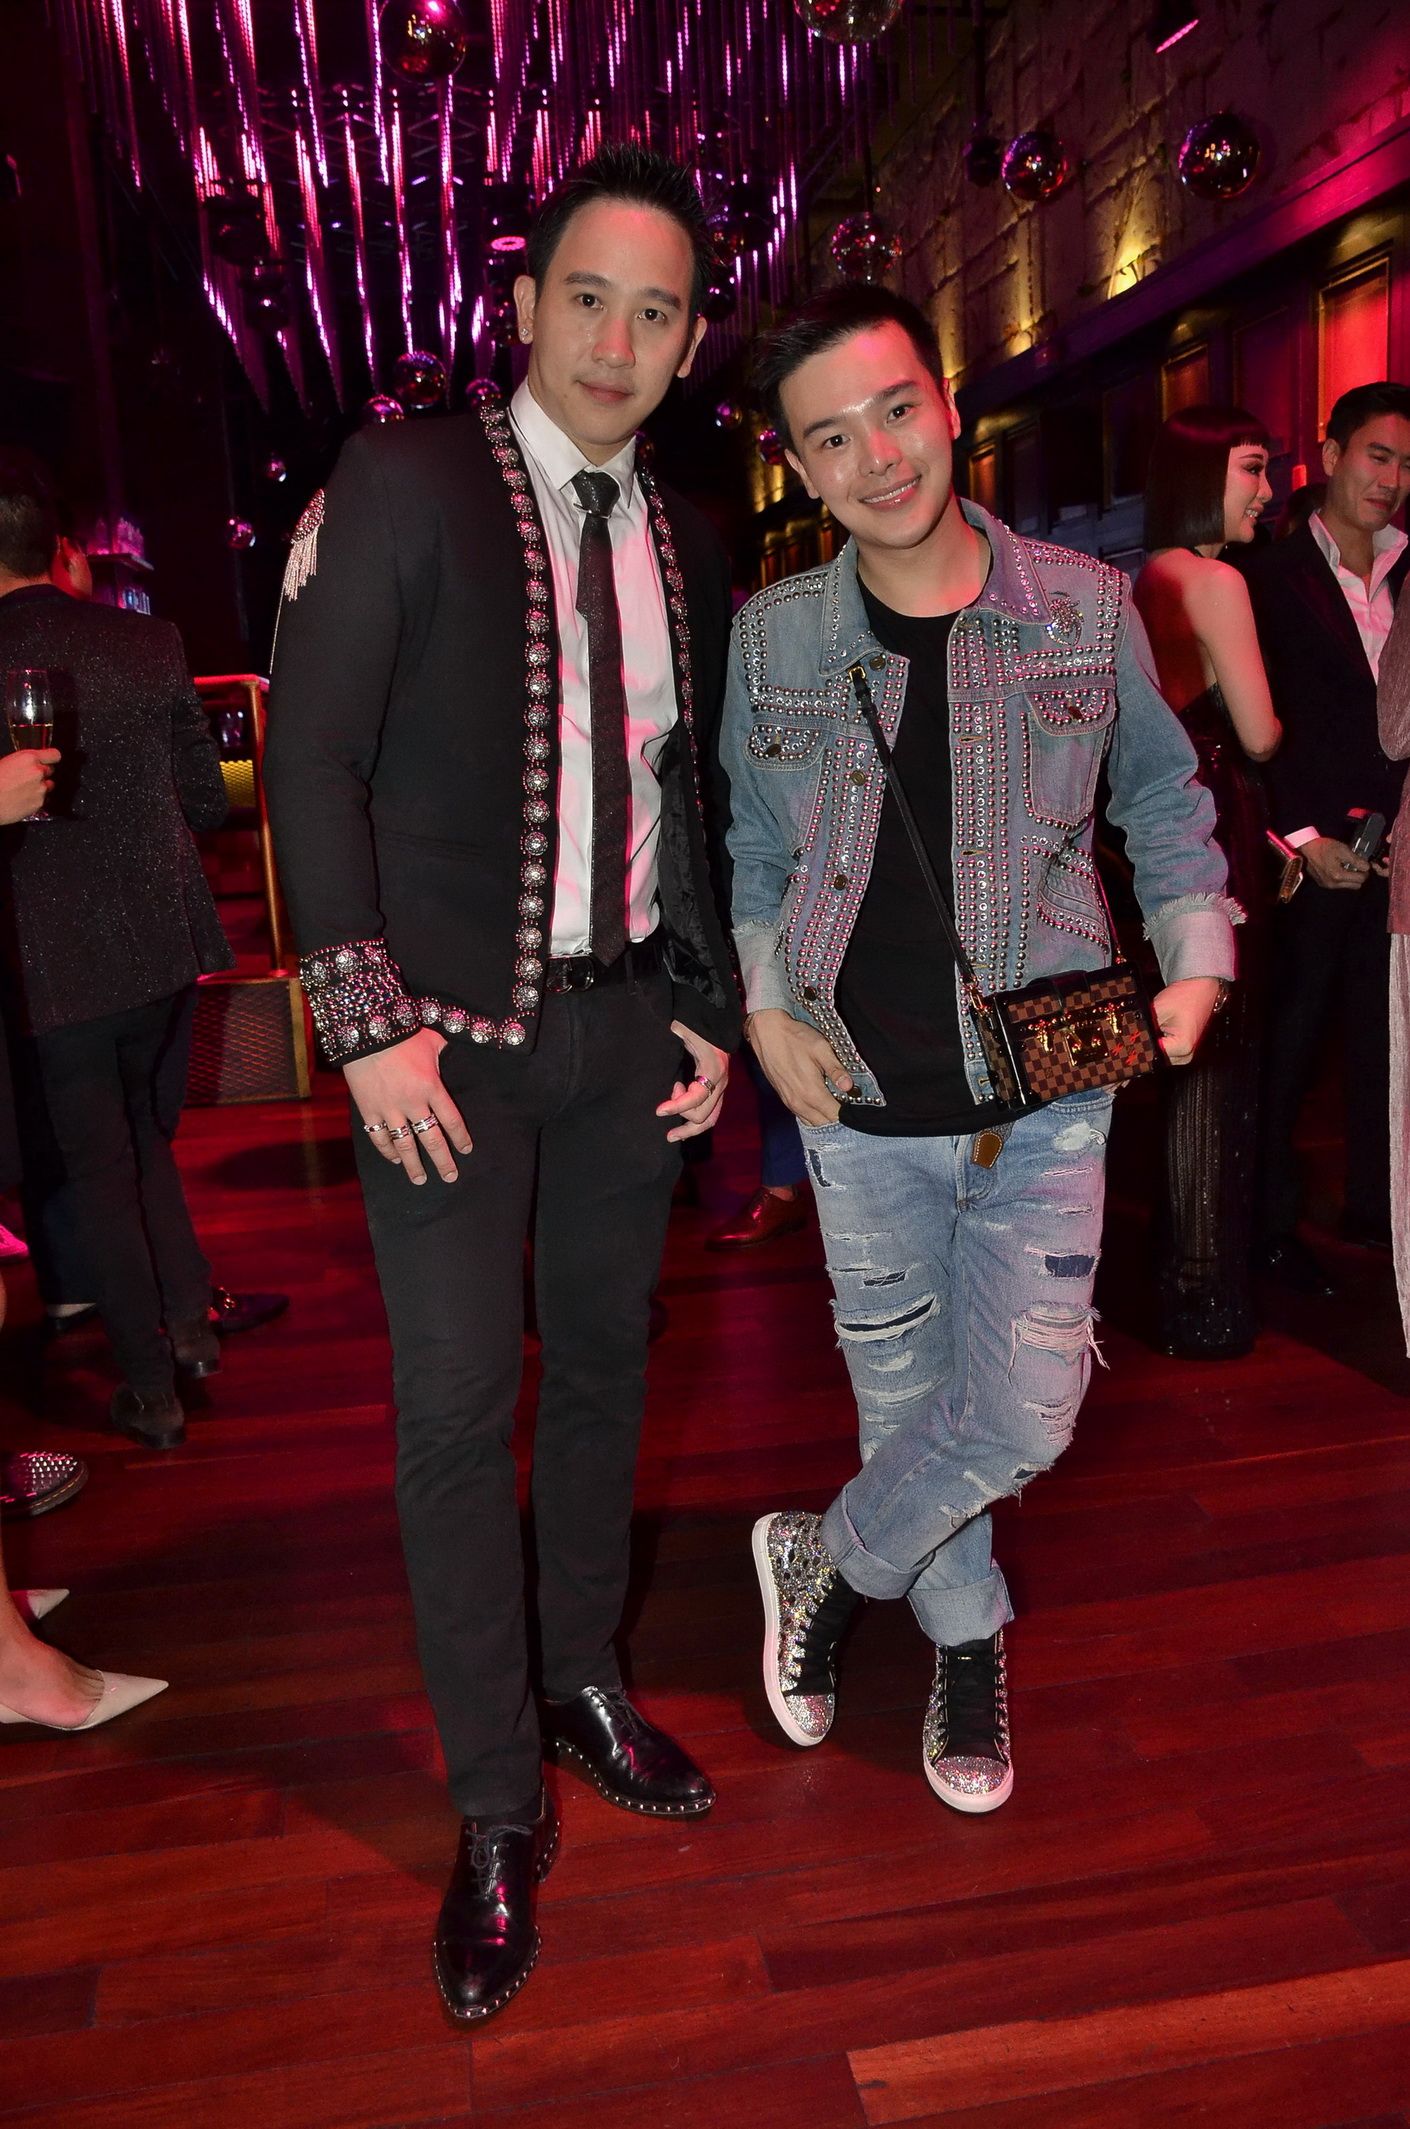 Jimmy Choo unveils 'Cruise 2018' at I WANT CHOO party | Lifestyle Asia ...